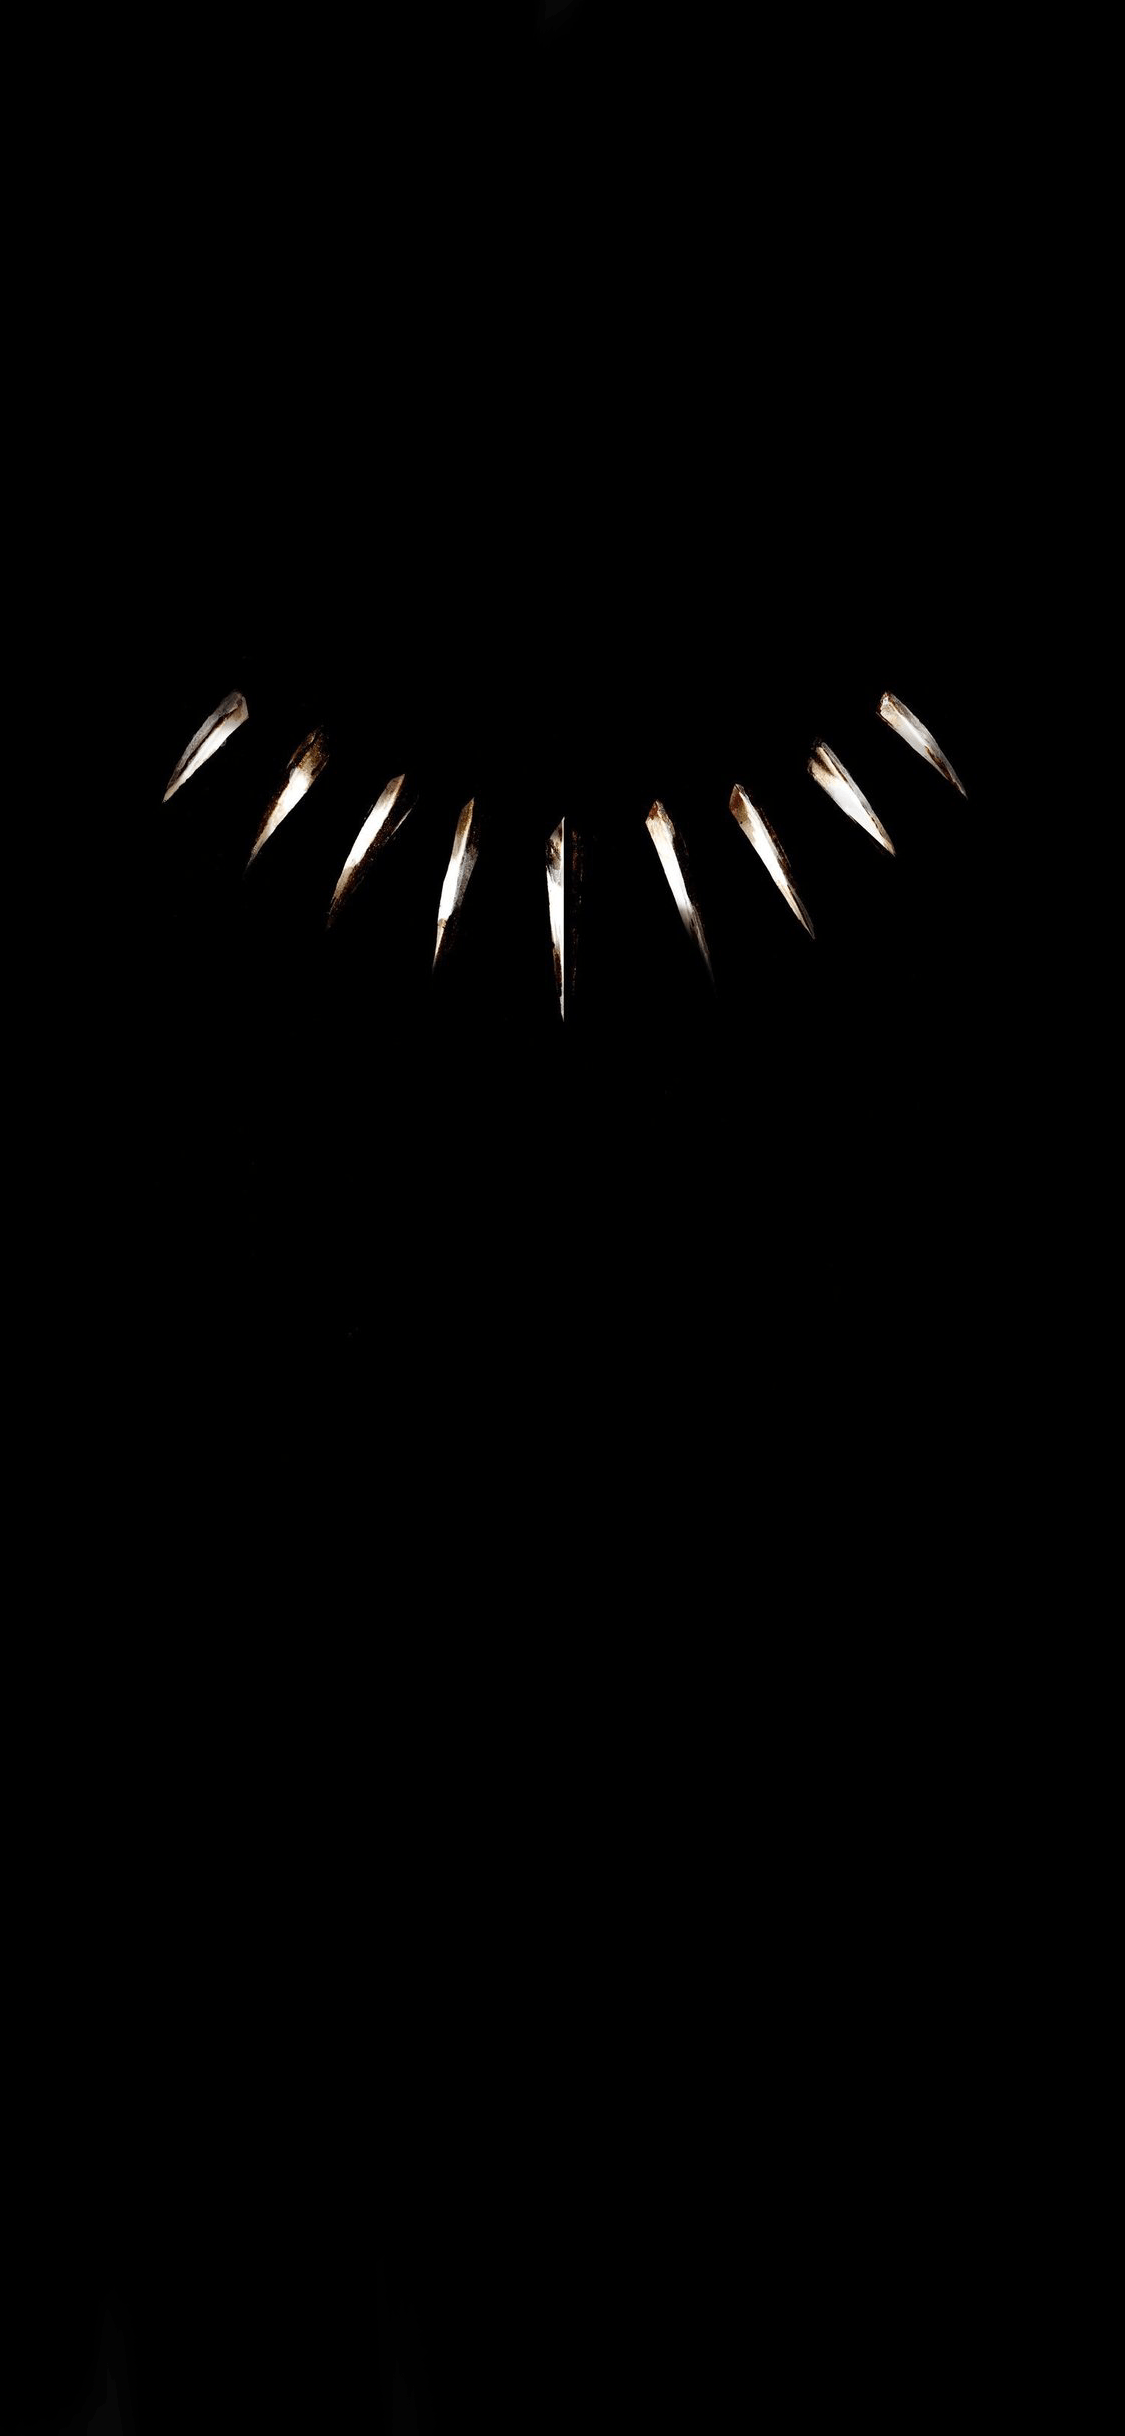 Black Panther Soundtrack wallpaper. It looks great on an